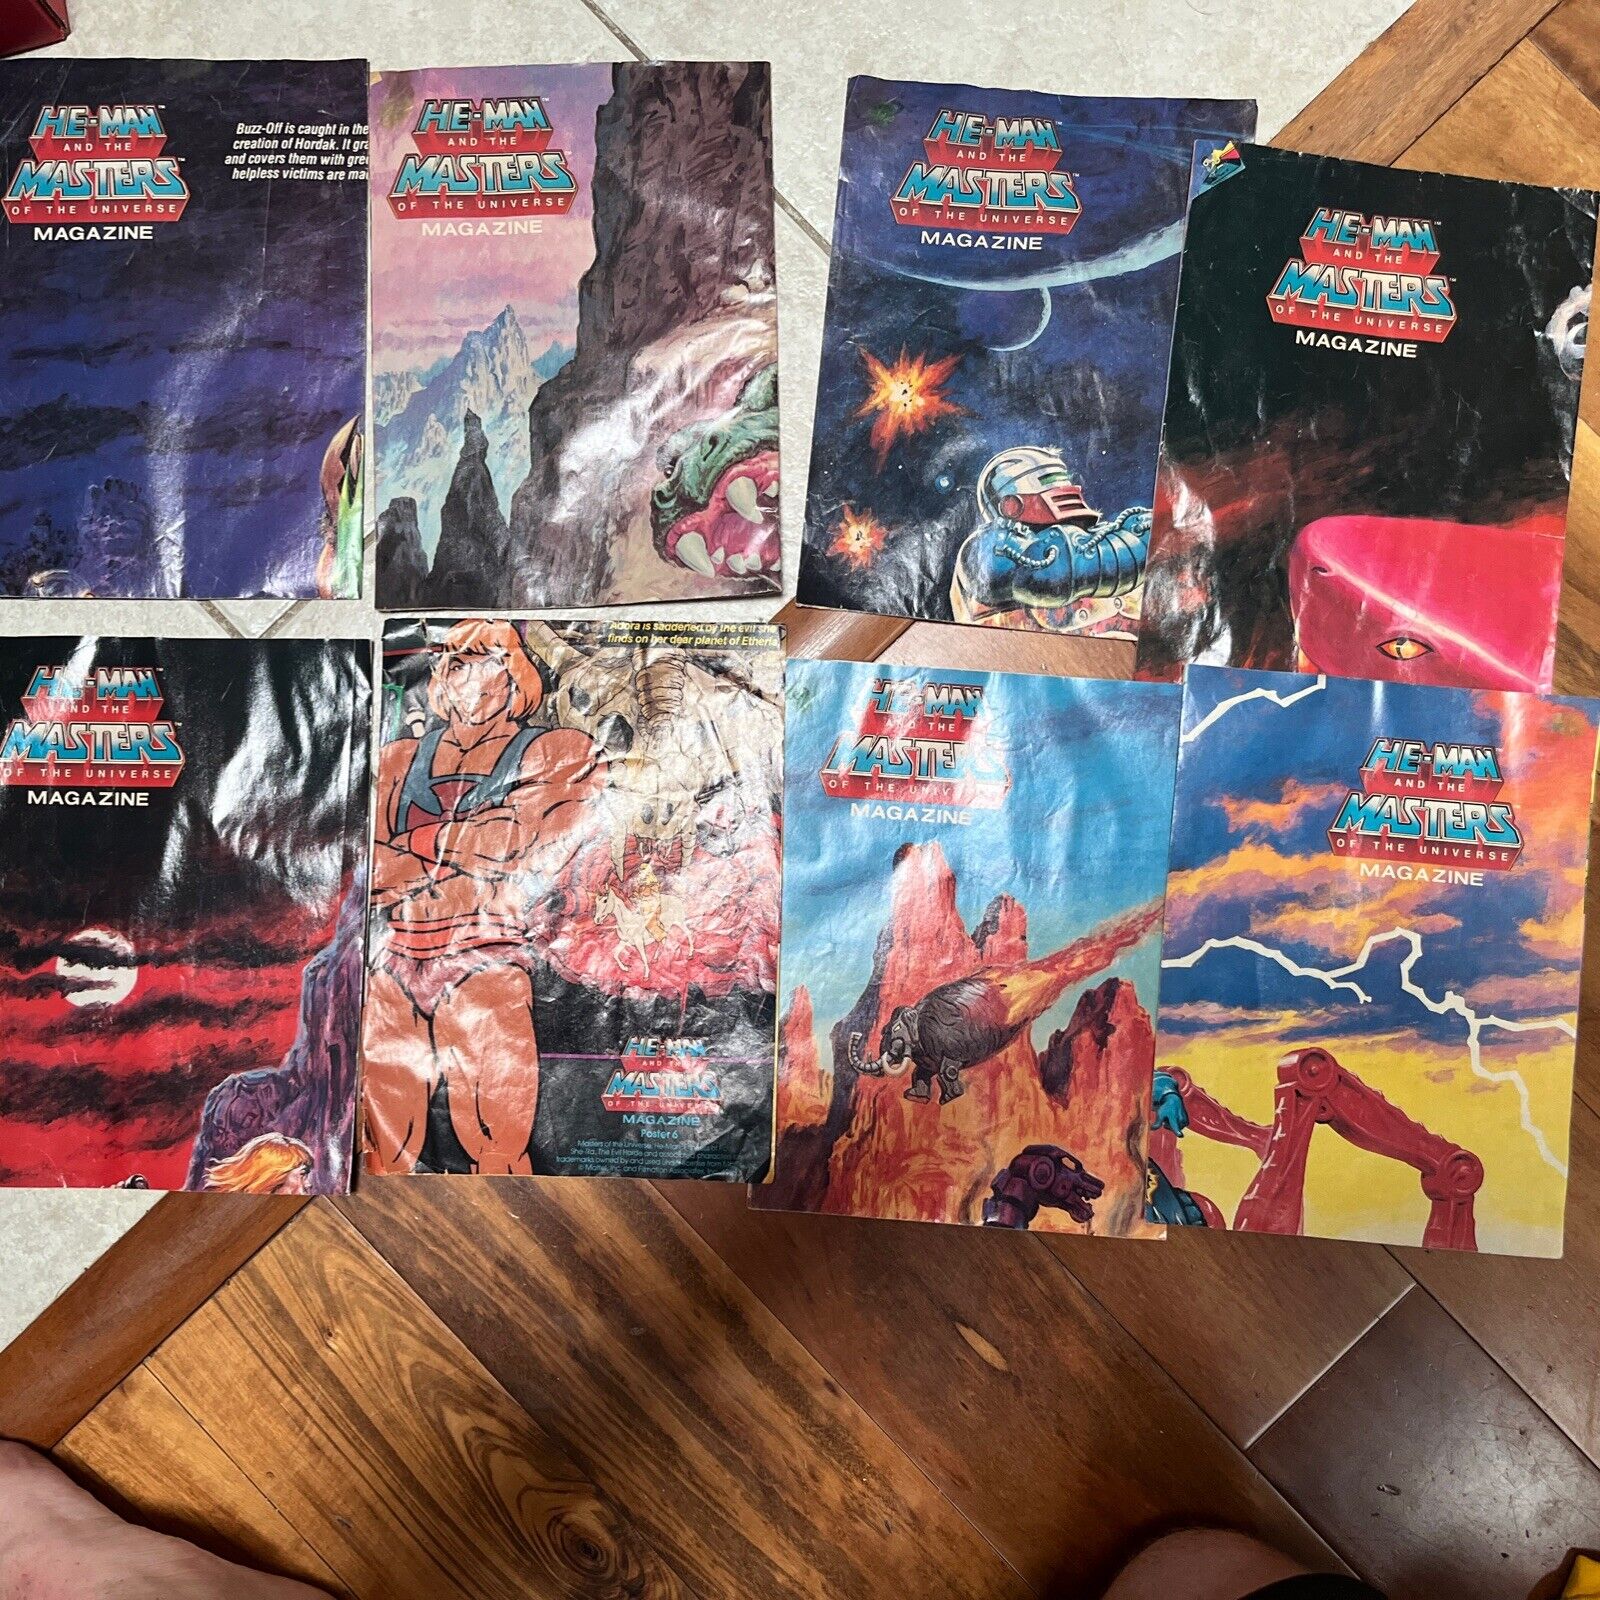 he-man poster vintage 8 Total - Poor Condition - A Couple Are Ok- Rips And Tear